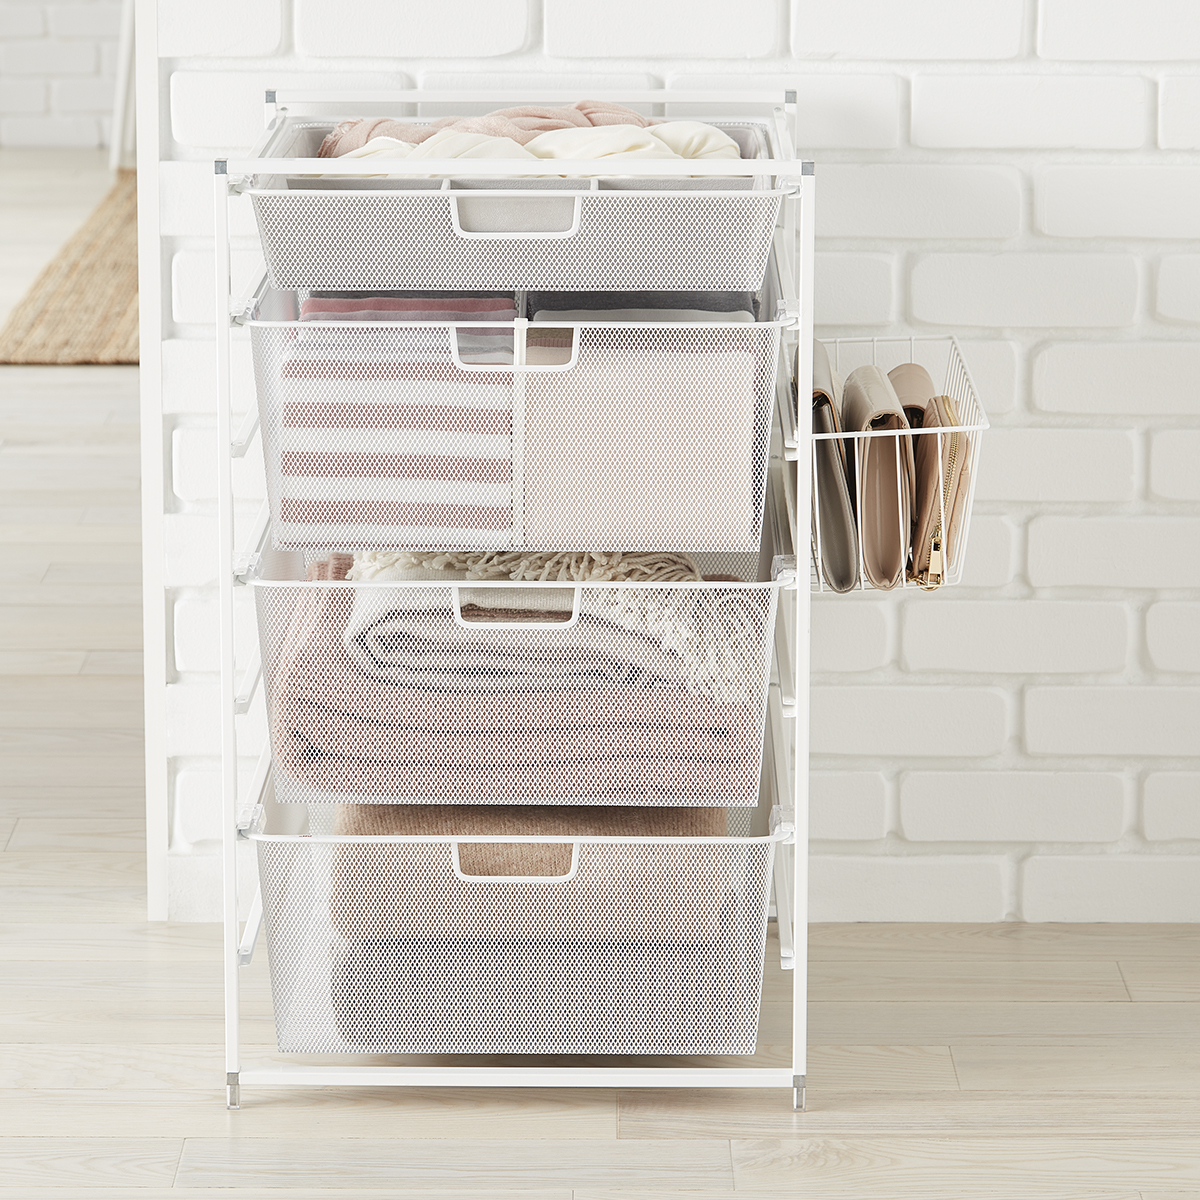 How To Decorate Your Elfa Drawers From The Container Store